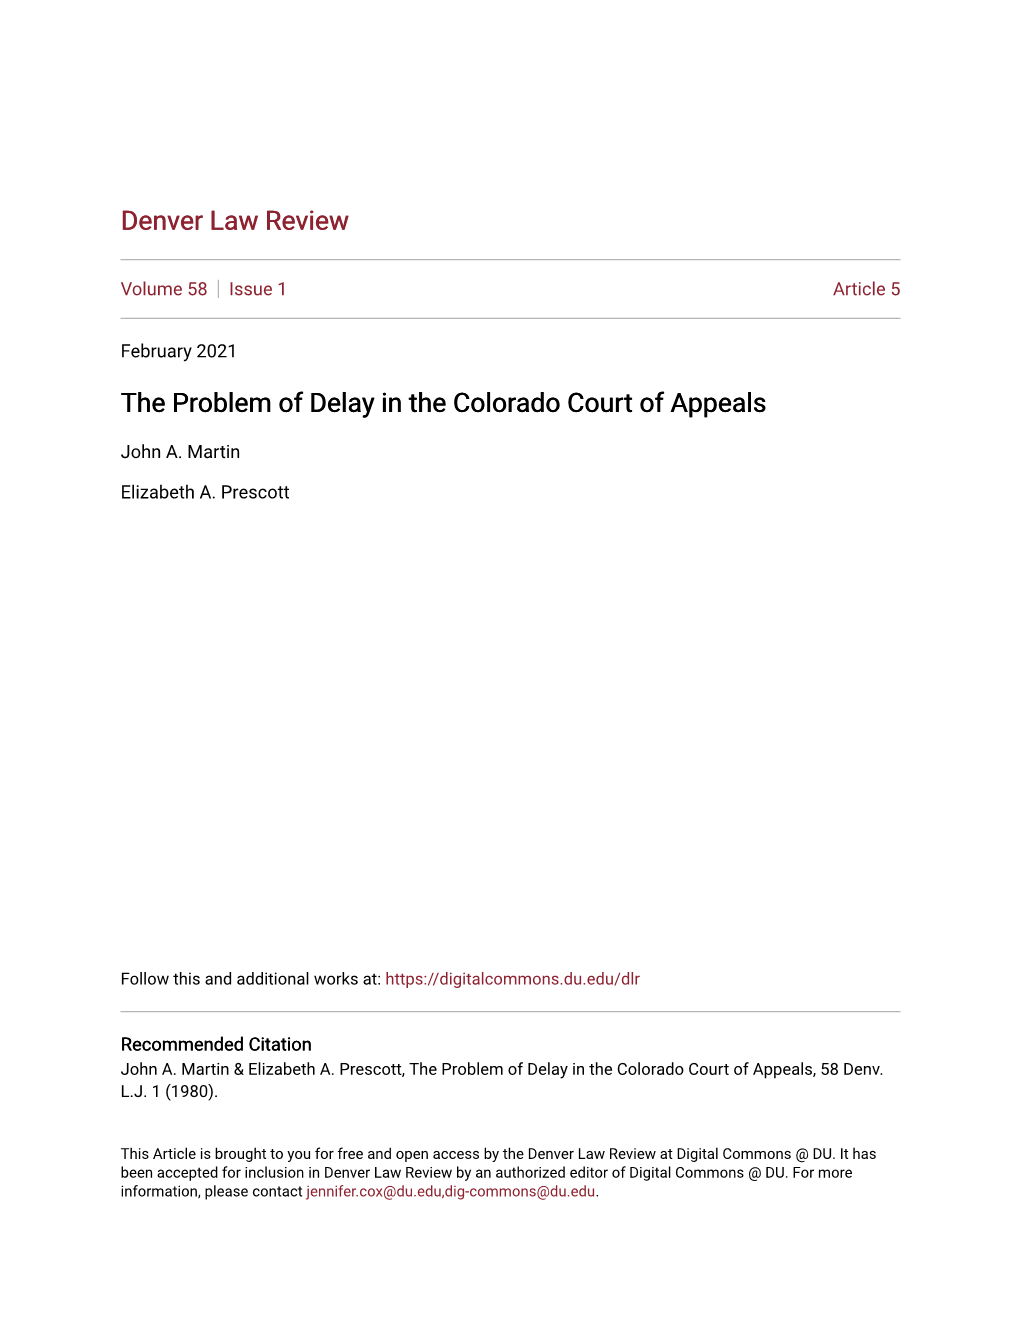 The Problem of Delay in the Colorado Court of Appeals